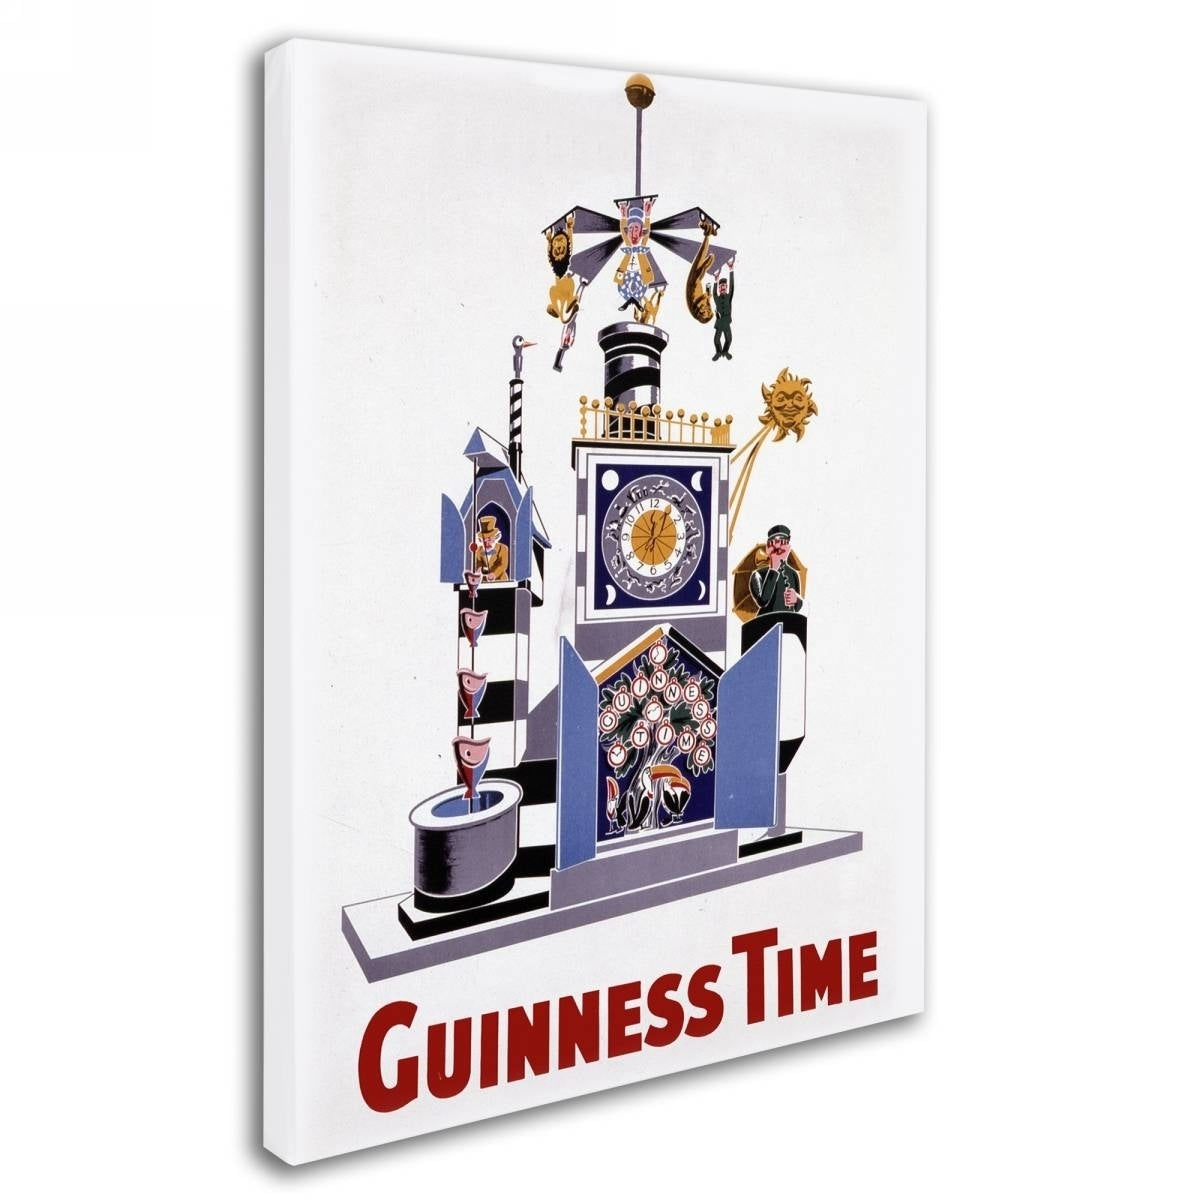 Guinness time - The Guinness Brewery invites you to experience the iconic brand in a unique and vibrant way through their captivating pop art. Indulge in the rich history and unmistakable taste of Guinness as you admire the Guinness Brewery 'Guinness Time I' Canvas Art.